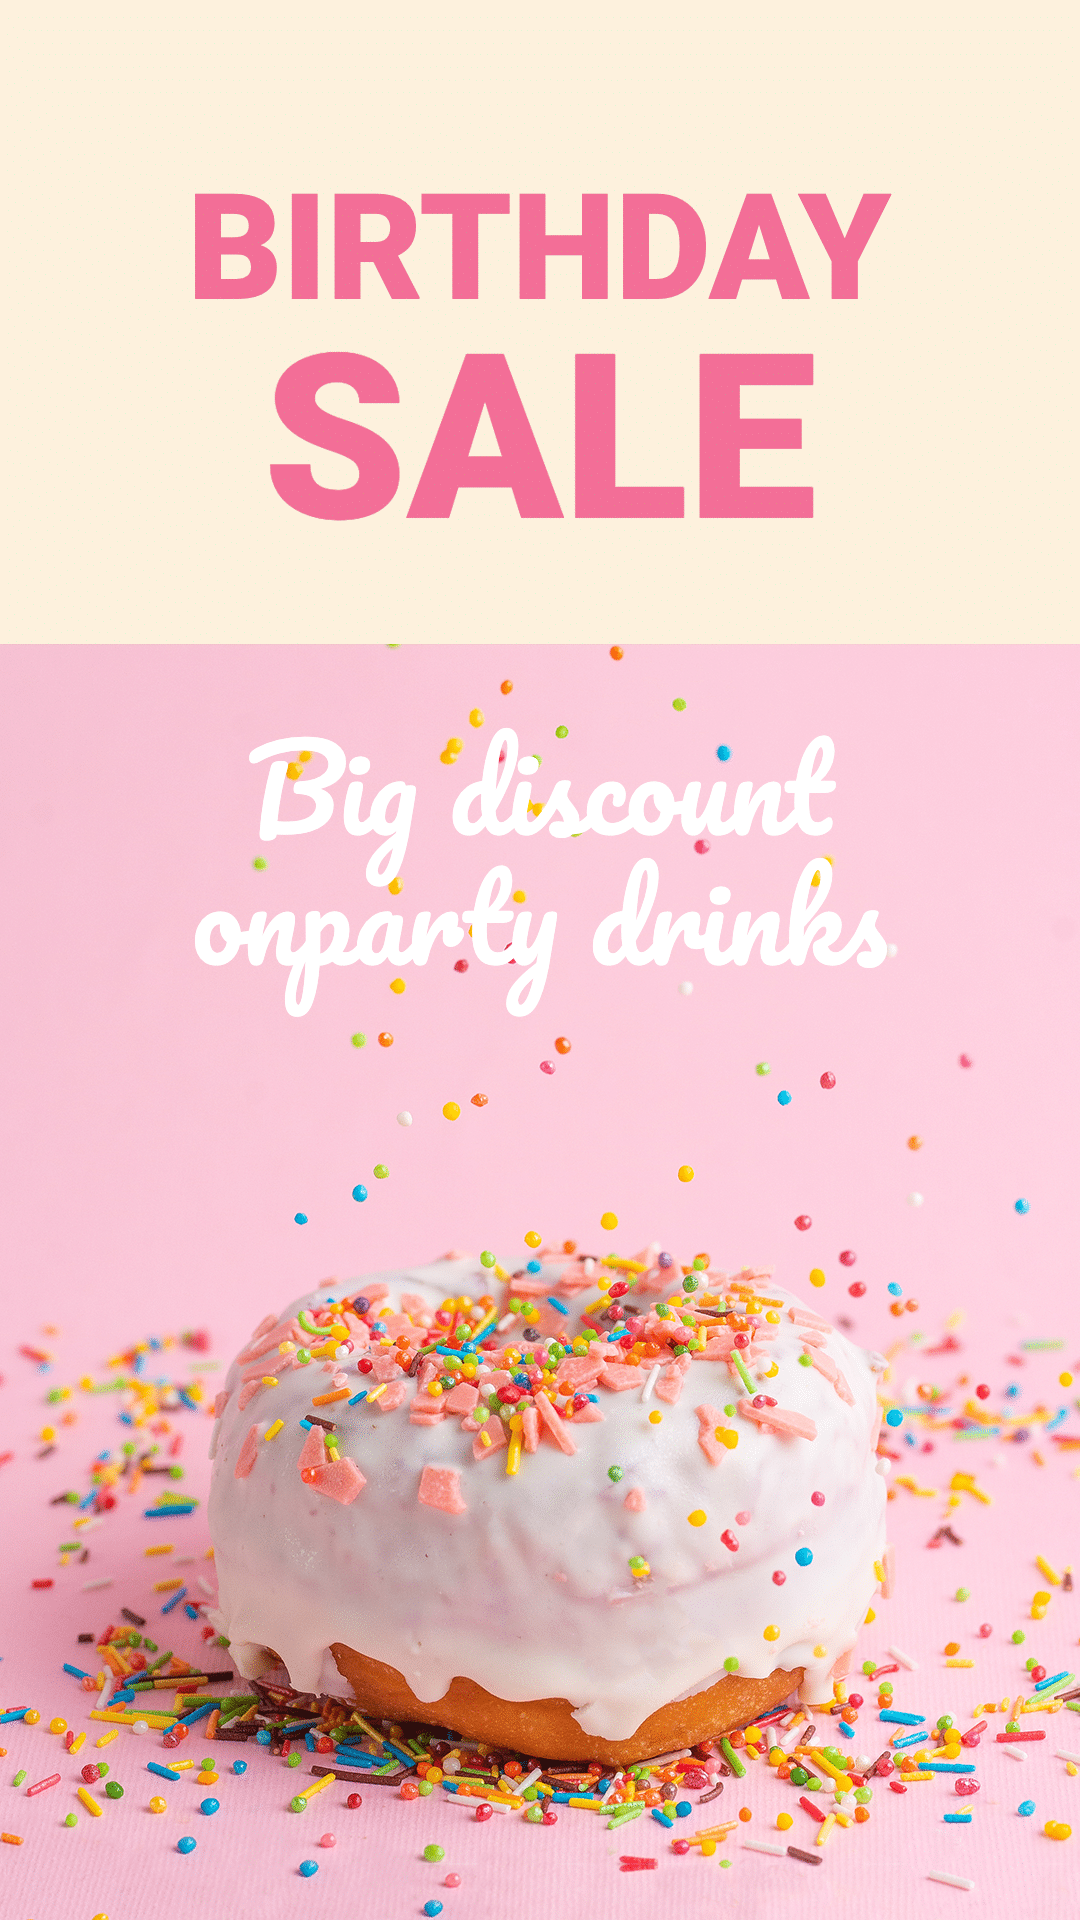 Simple Party Drinks Discount Birthday Sale Ecommerce Story预览效果